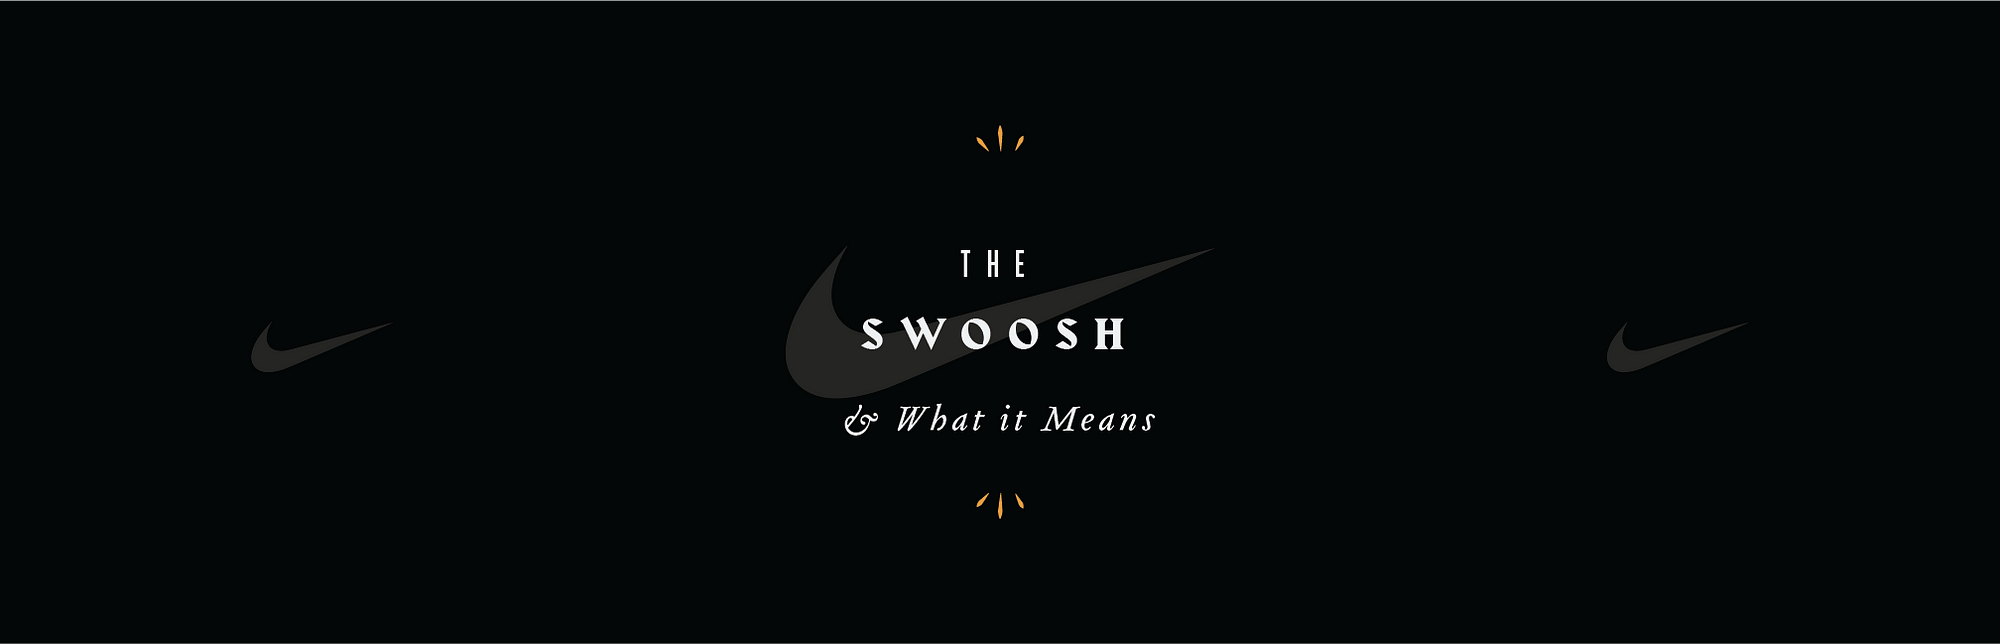 Swoosh  meaning of Swoosh 